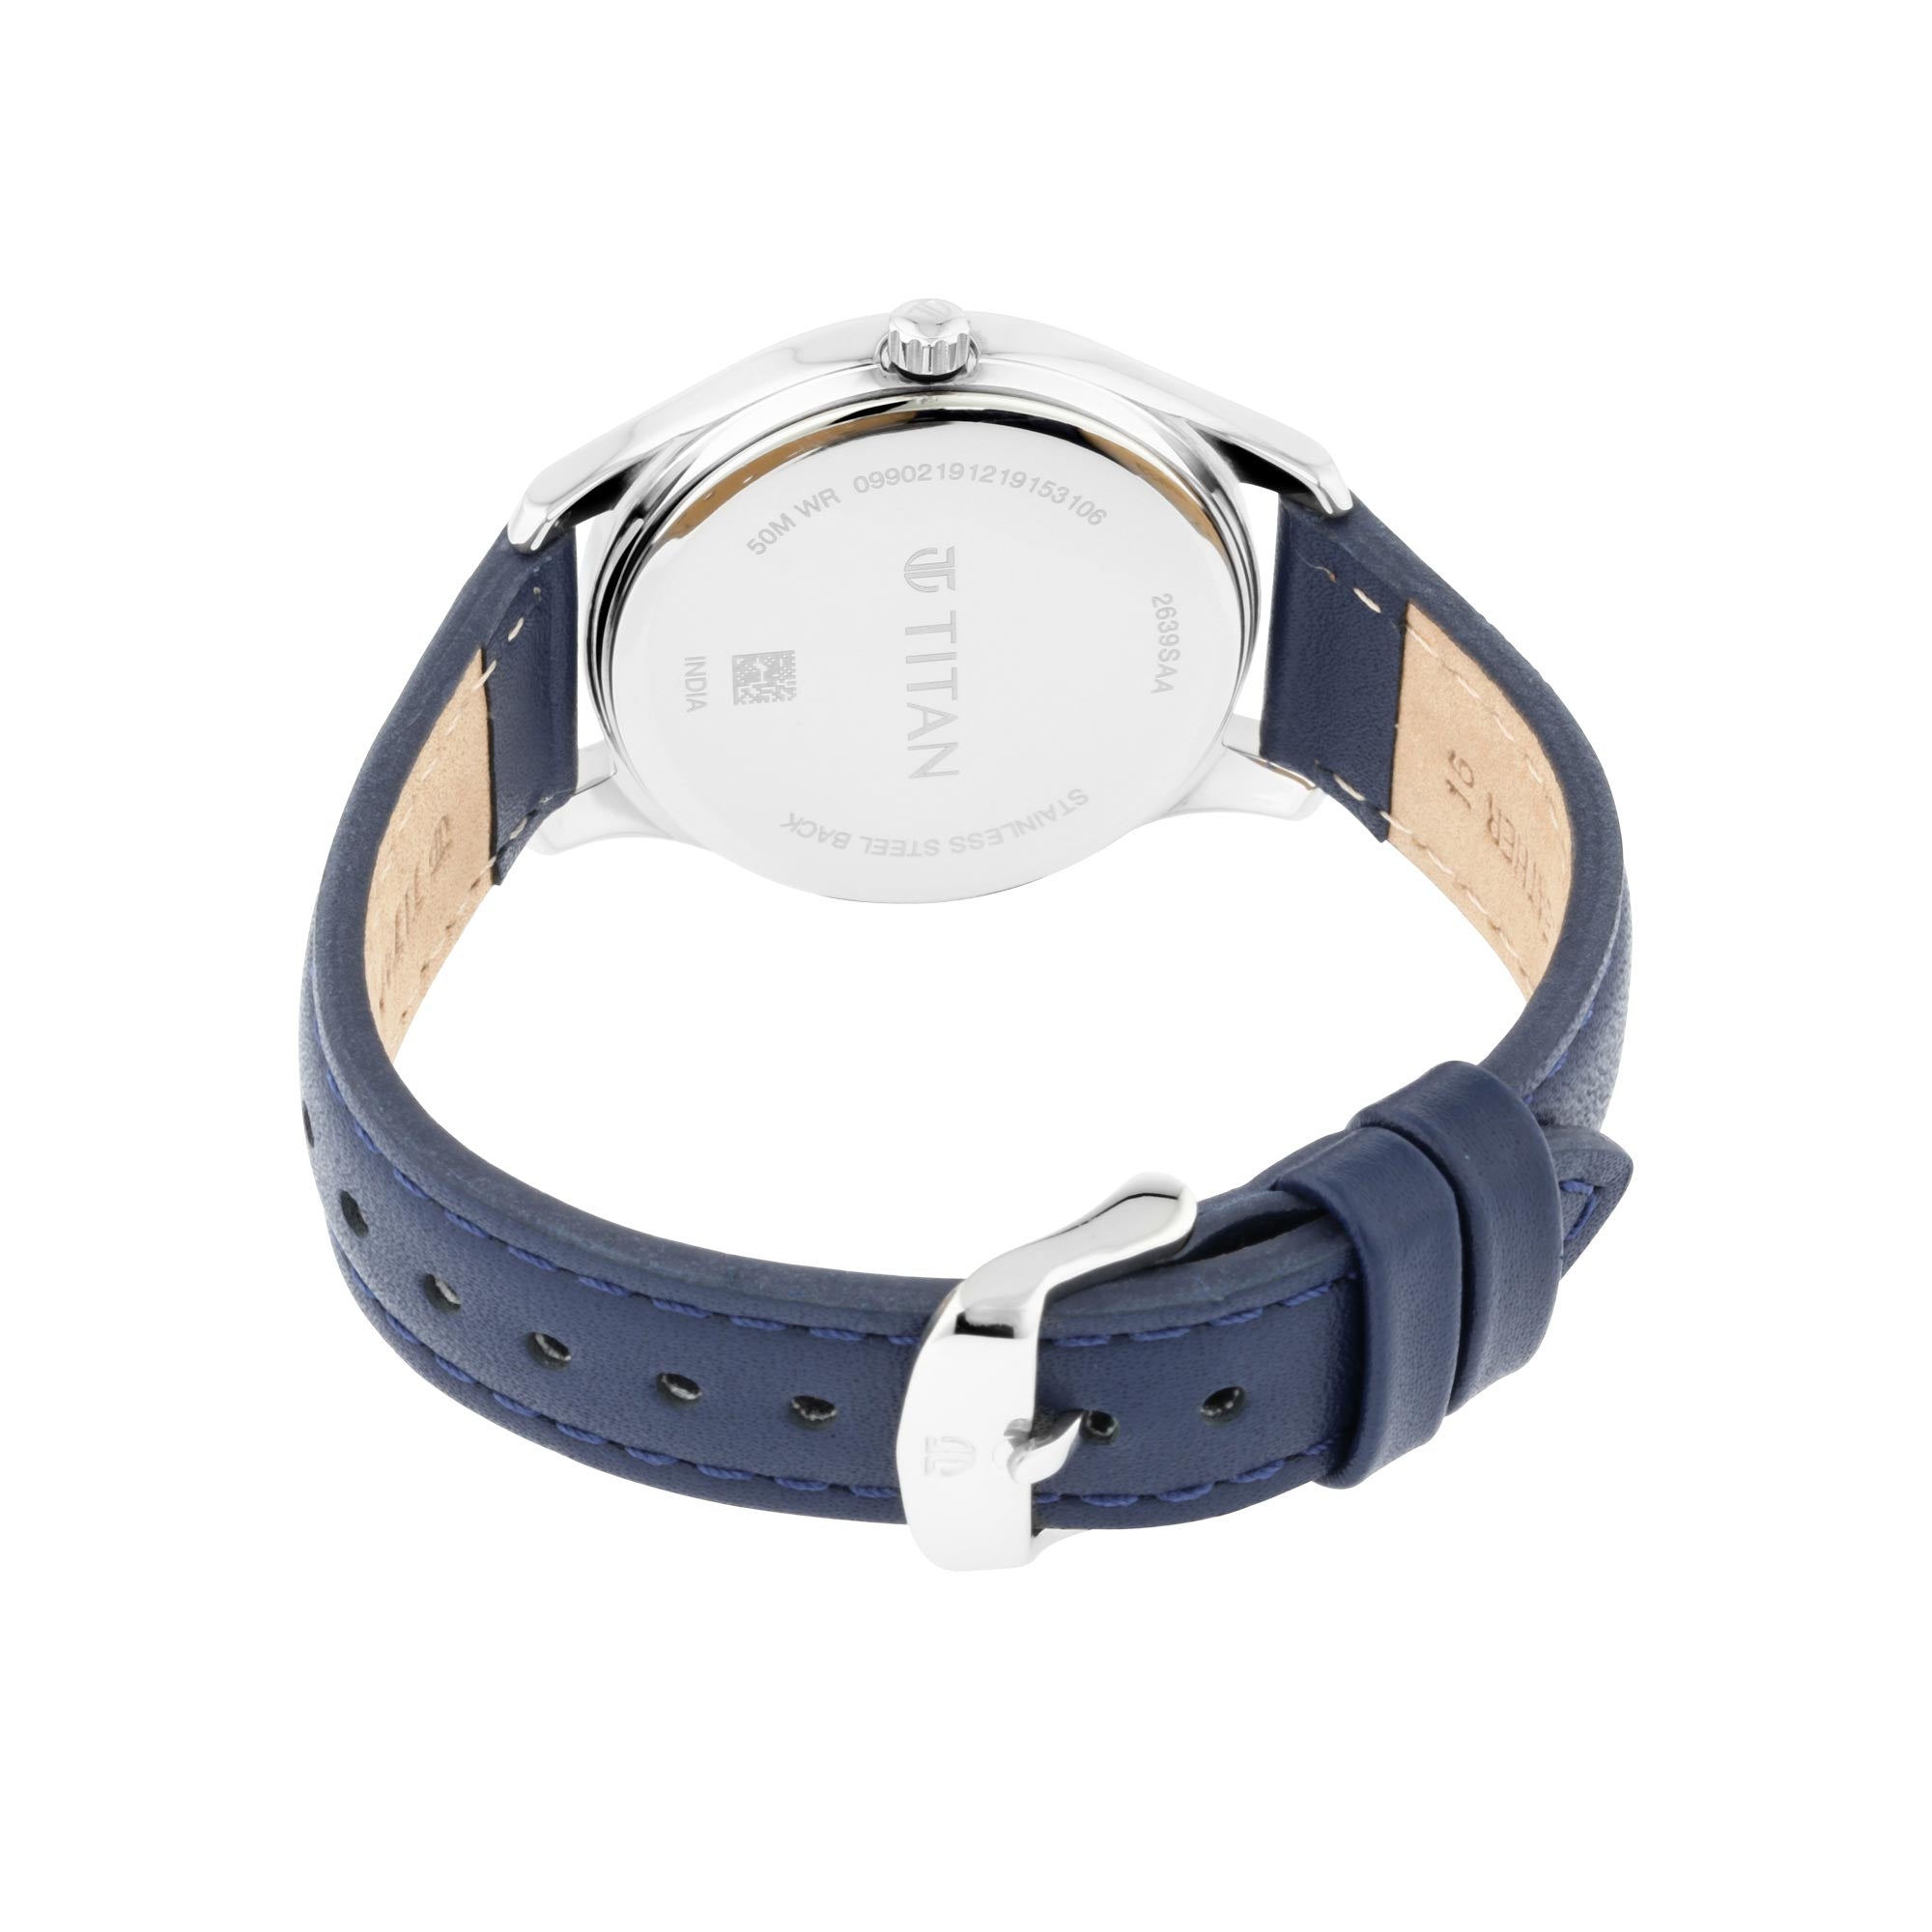 Titan Workwear Blue Dial Women Watch With Leather Strap